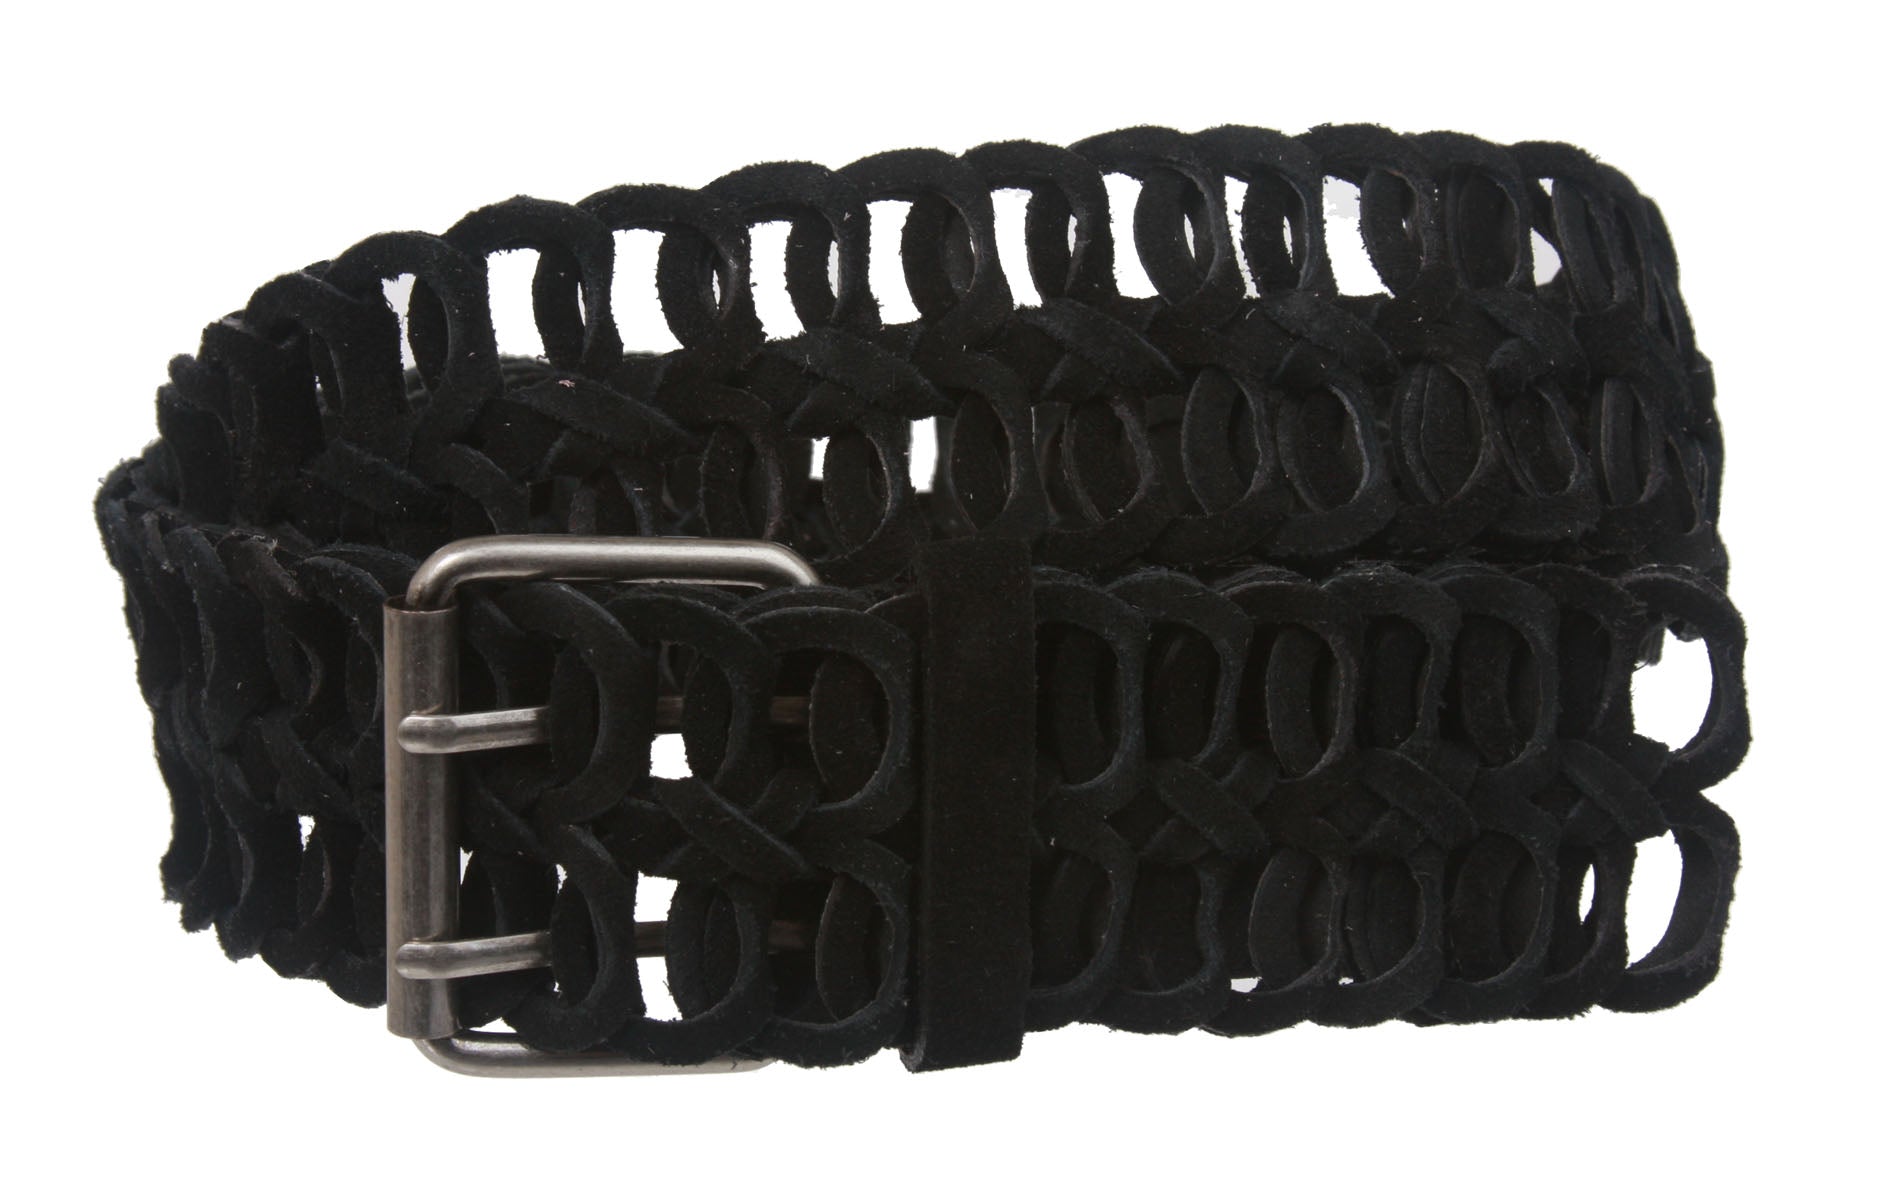 2" Wide Braided Leather Link Belt